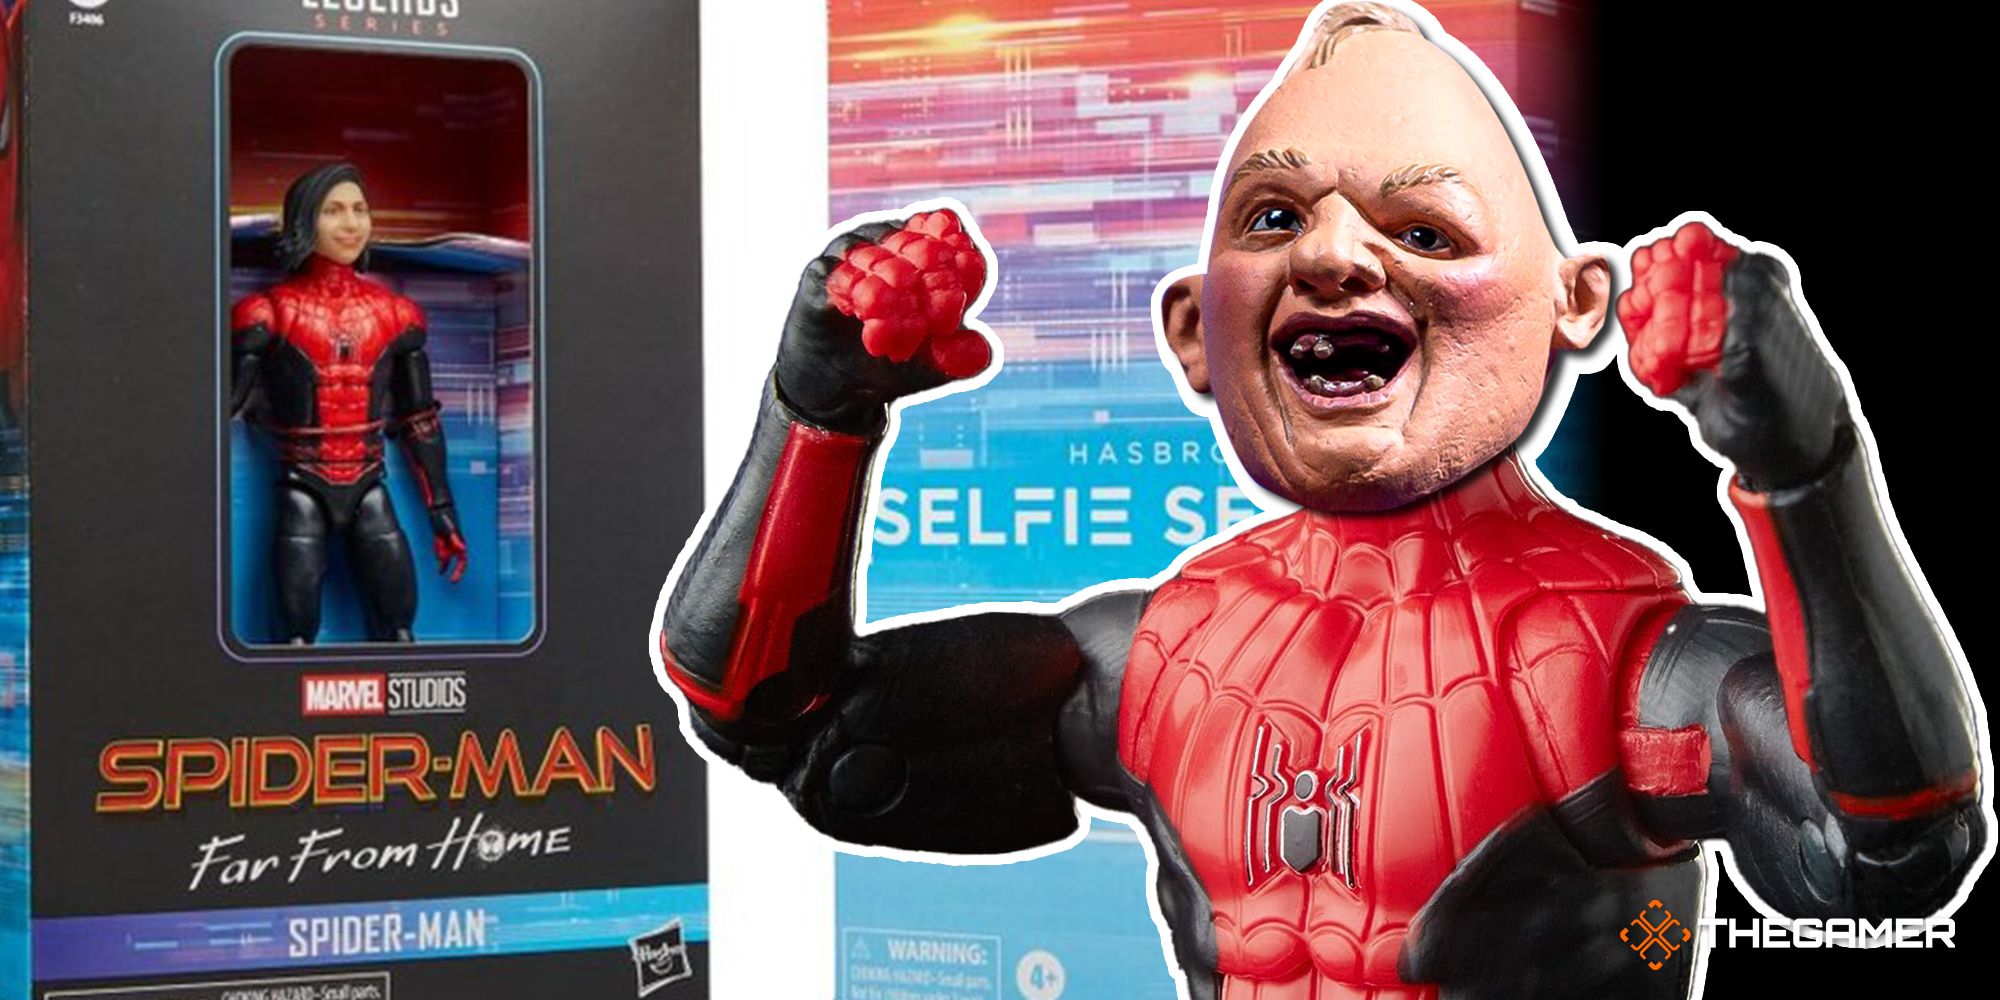 42-Instead Of Spider-Man, Hasbro Selfie Series Turned Me Into A Spider-Monster (1)